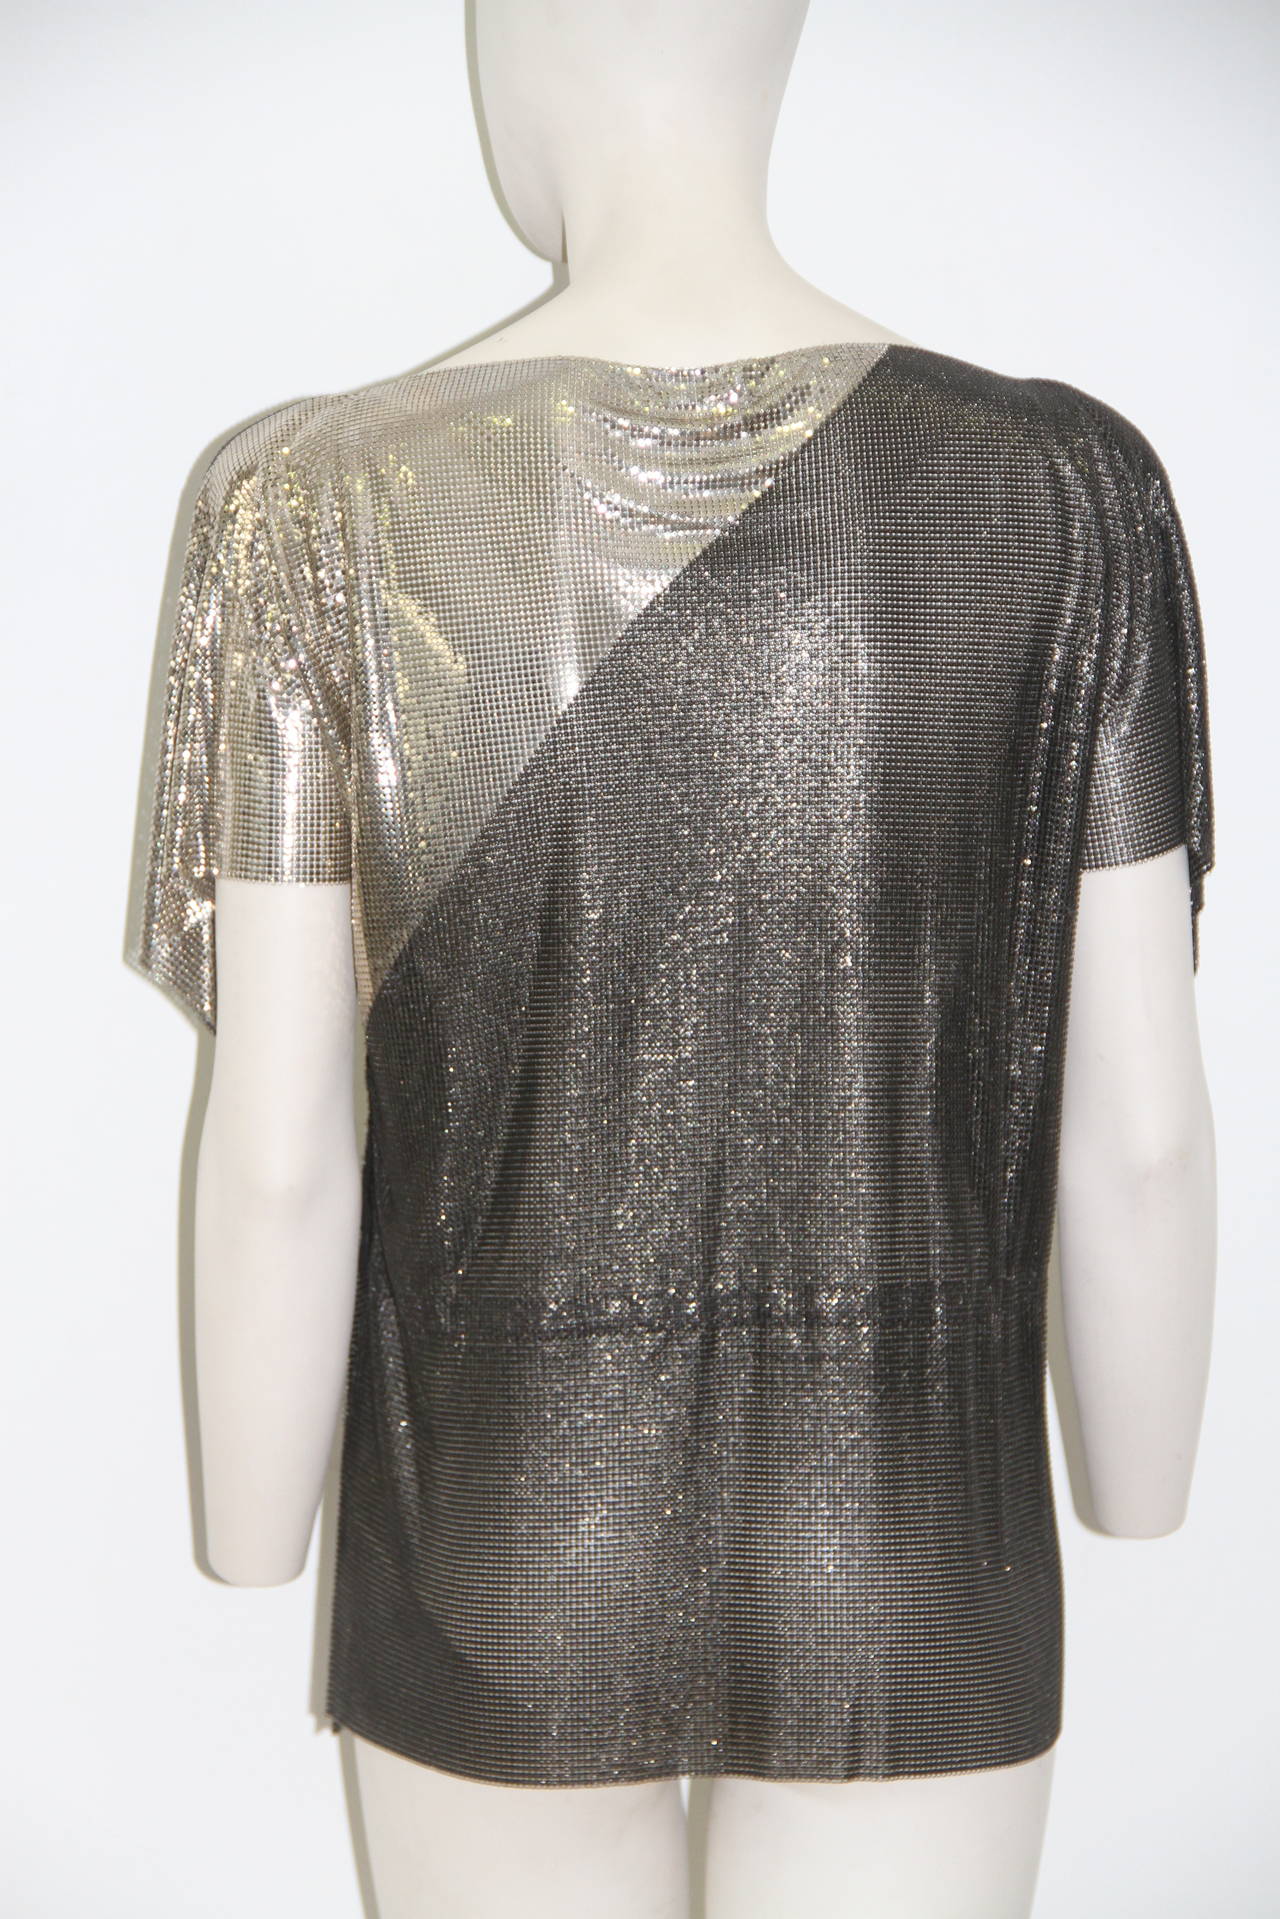 Museum Quality Gianni Versace Oroton Tunic Fall 1984 In Excellent Condition For Sale In W1, GB